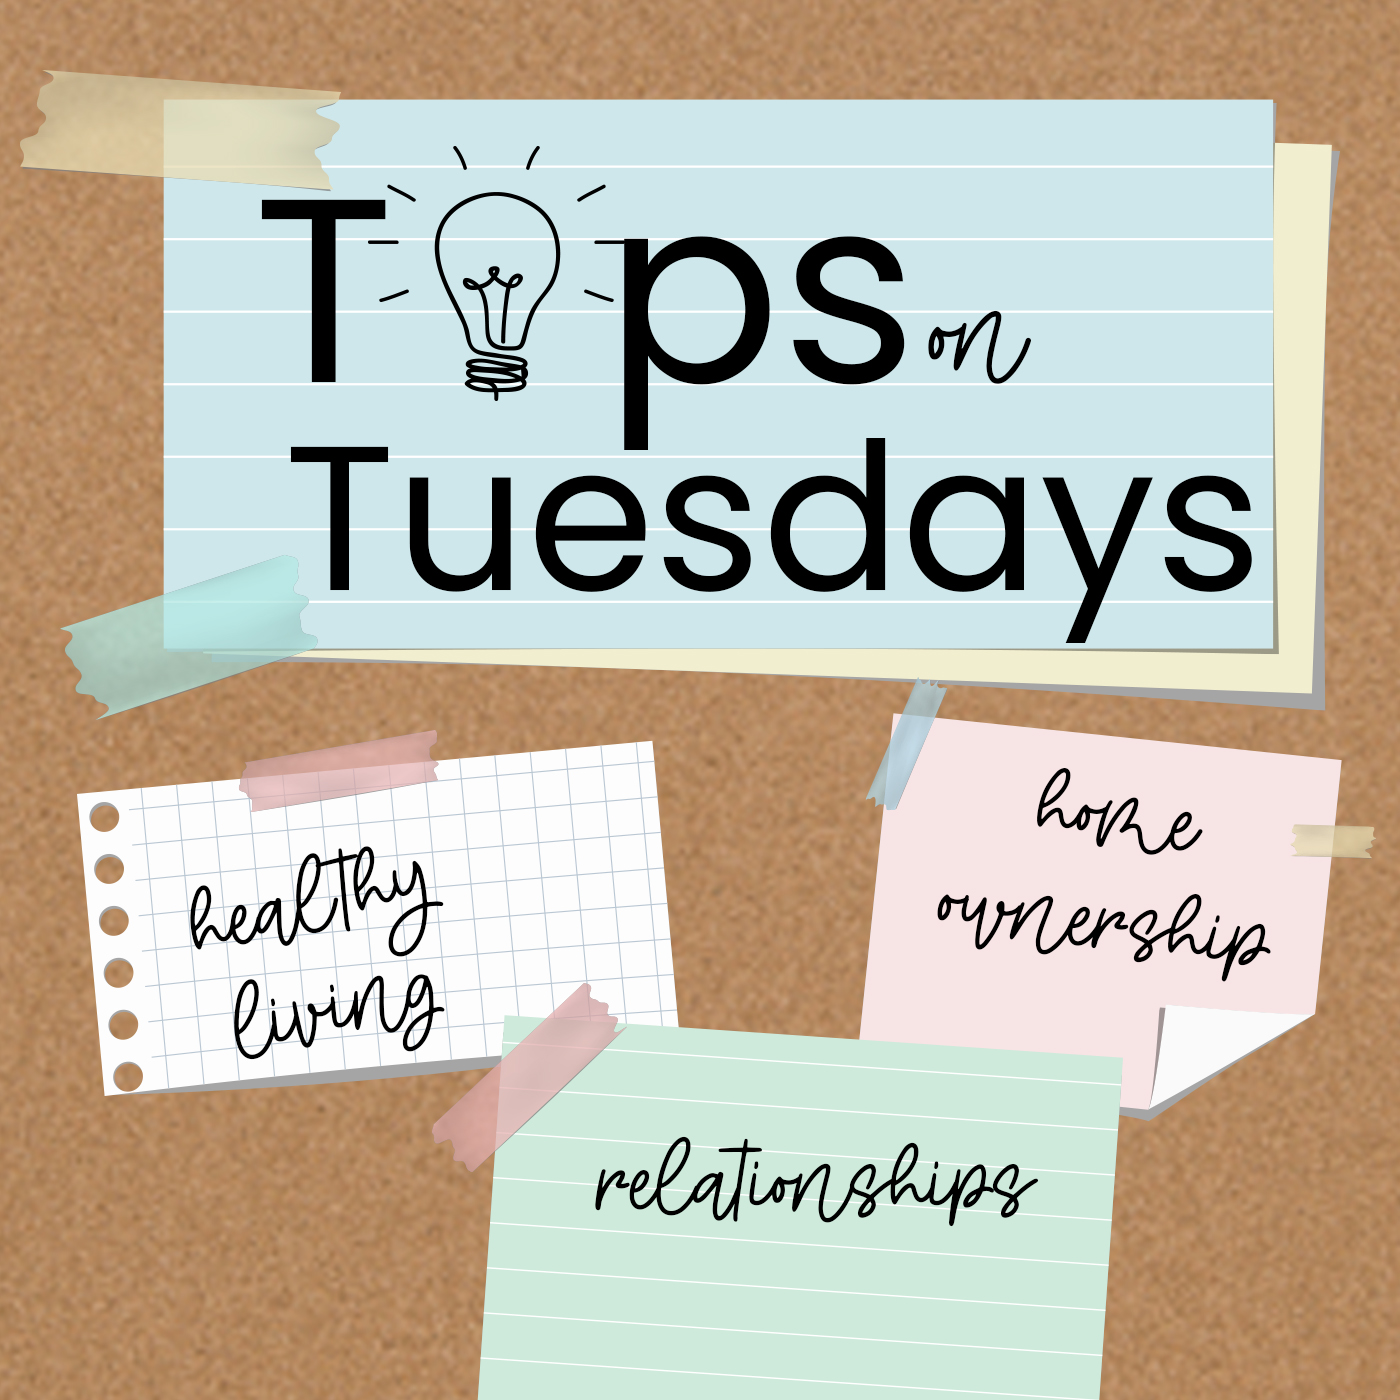 Tips for Tuesday!